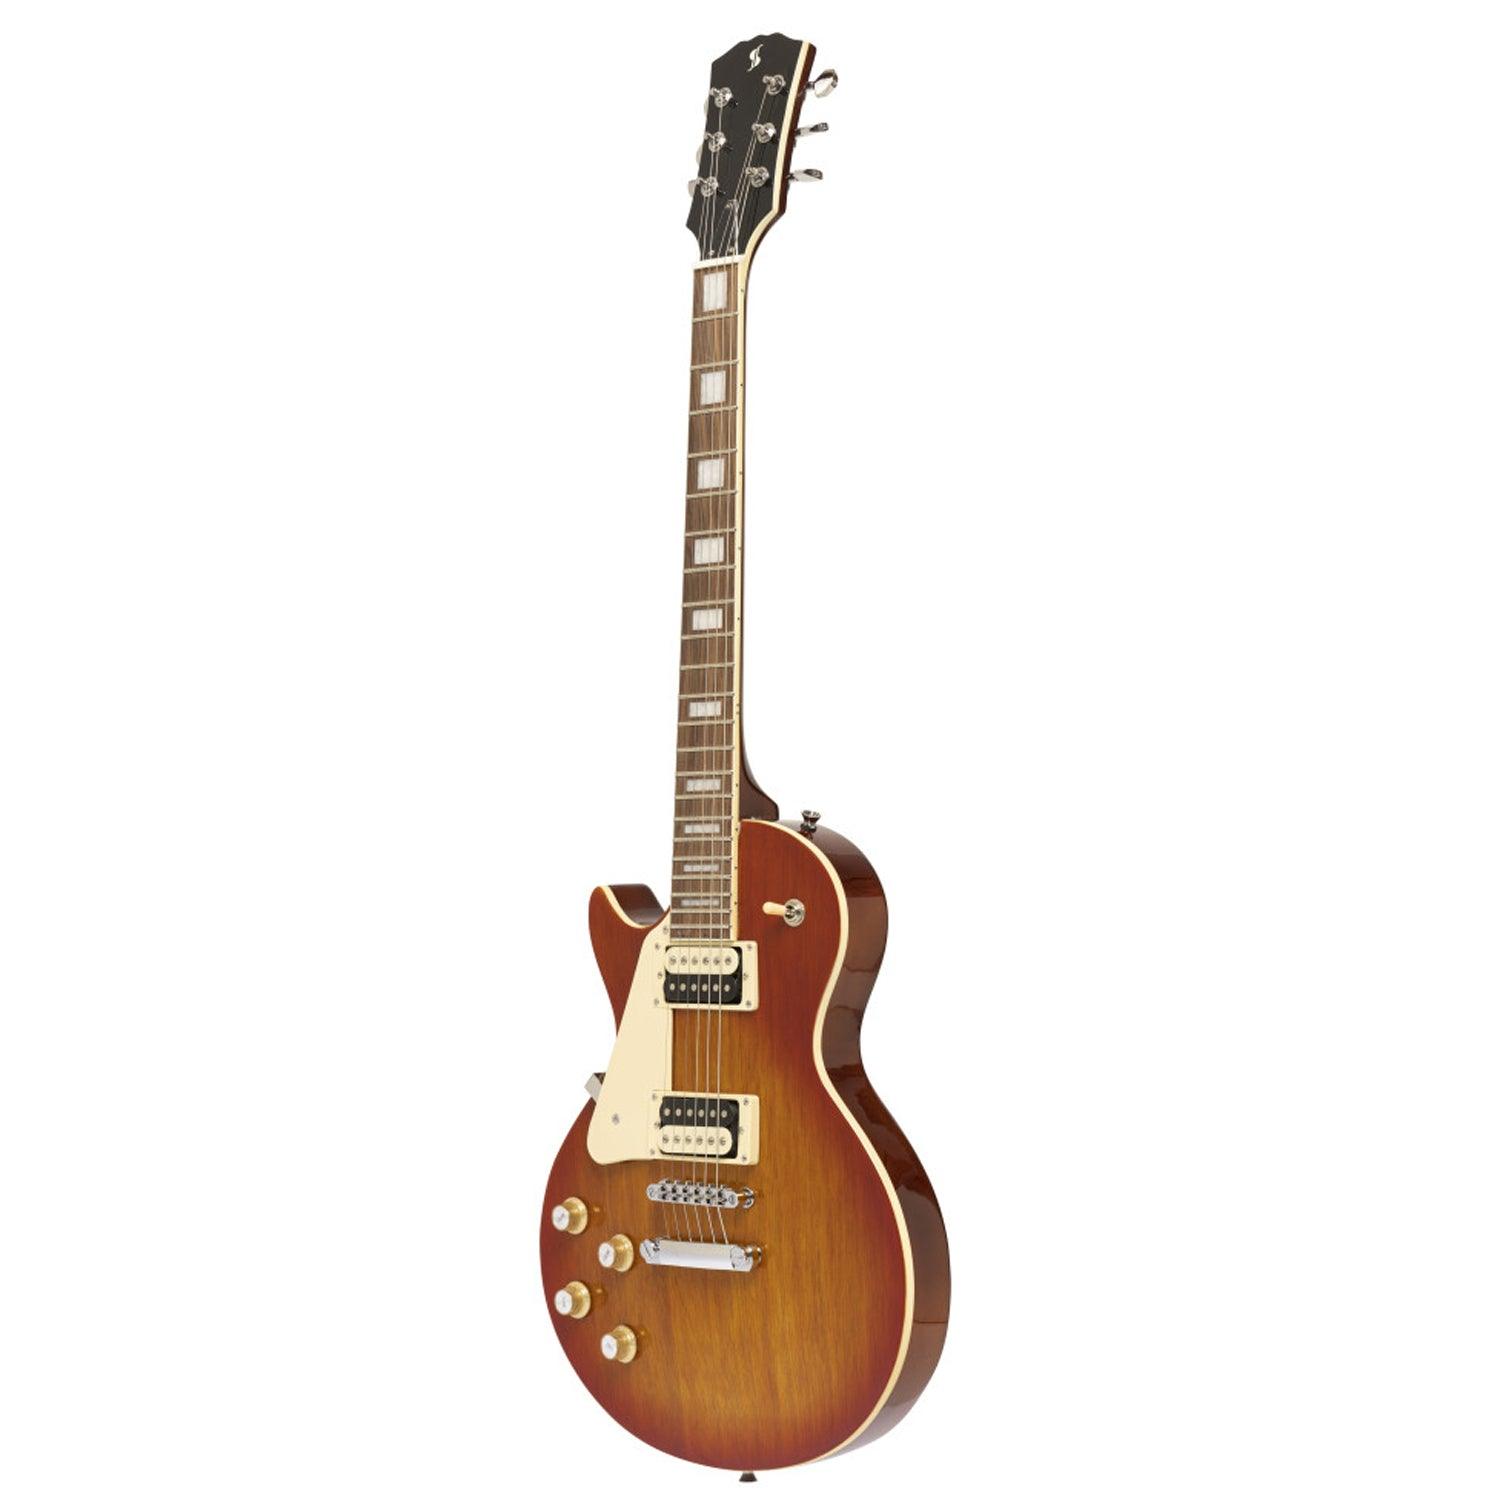 Stagg SEL-STD VSB LH Standard Series Electric Guitar with solid Mahogany body archtop, Left Hand - DY Pro Audio